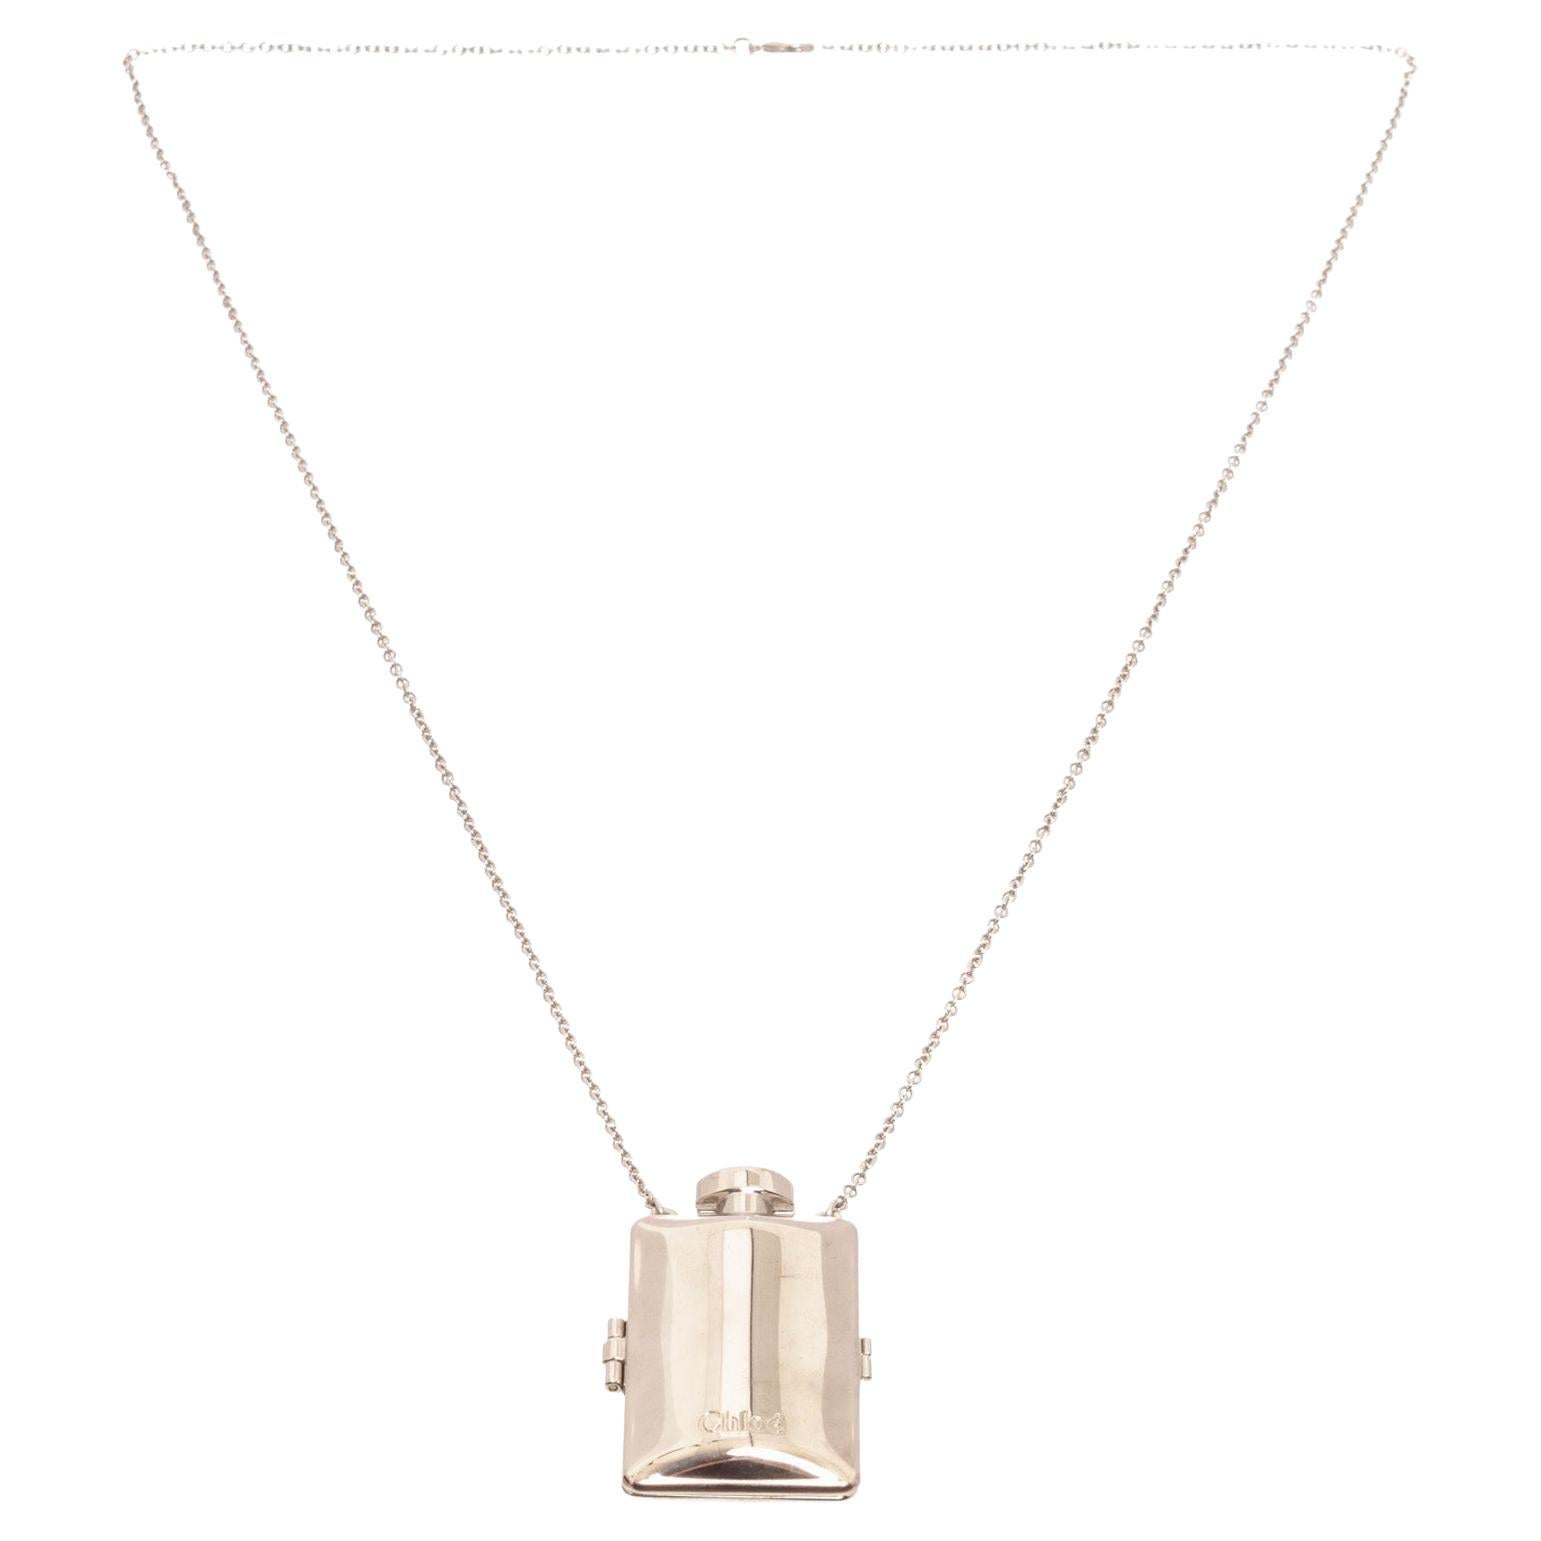 Chole Silver Ally Necklace with Silver-Tone Hardware and Turn Lock Closure  